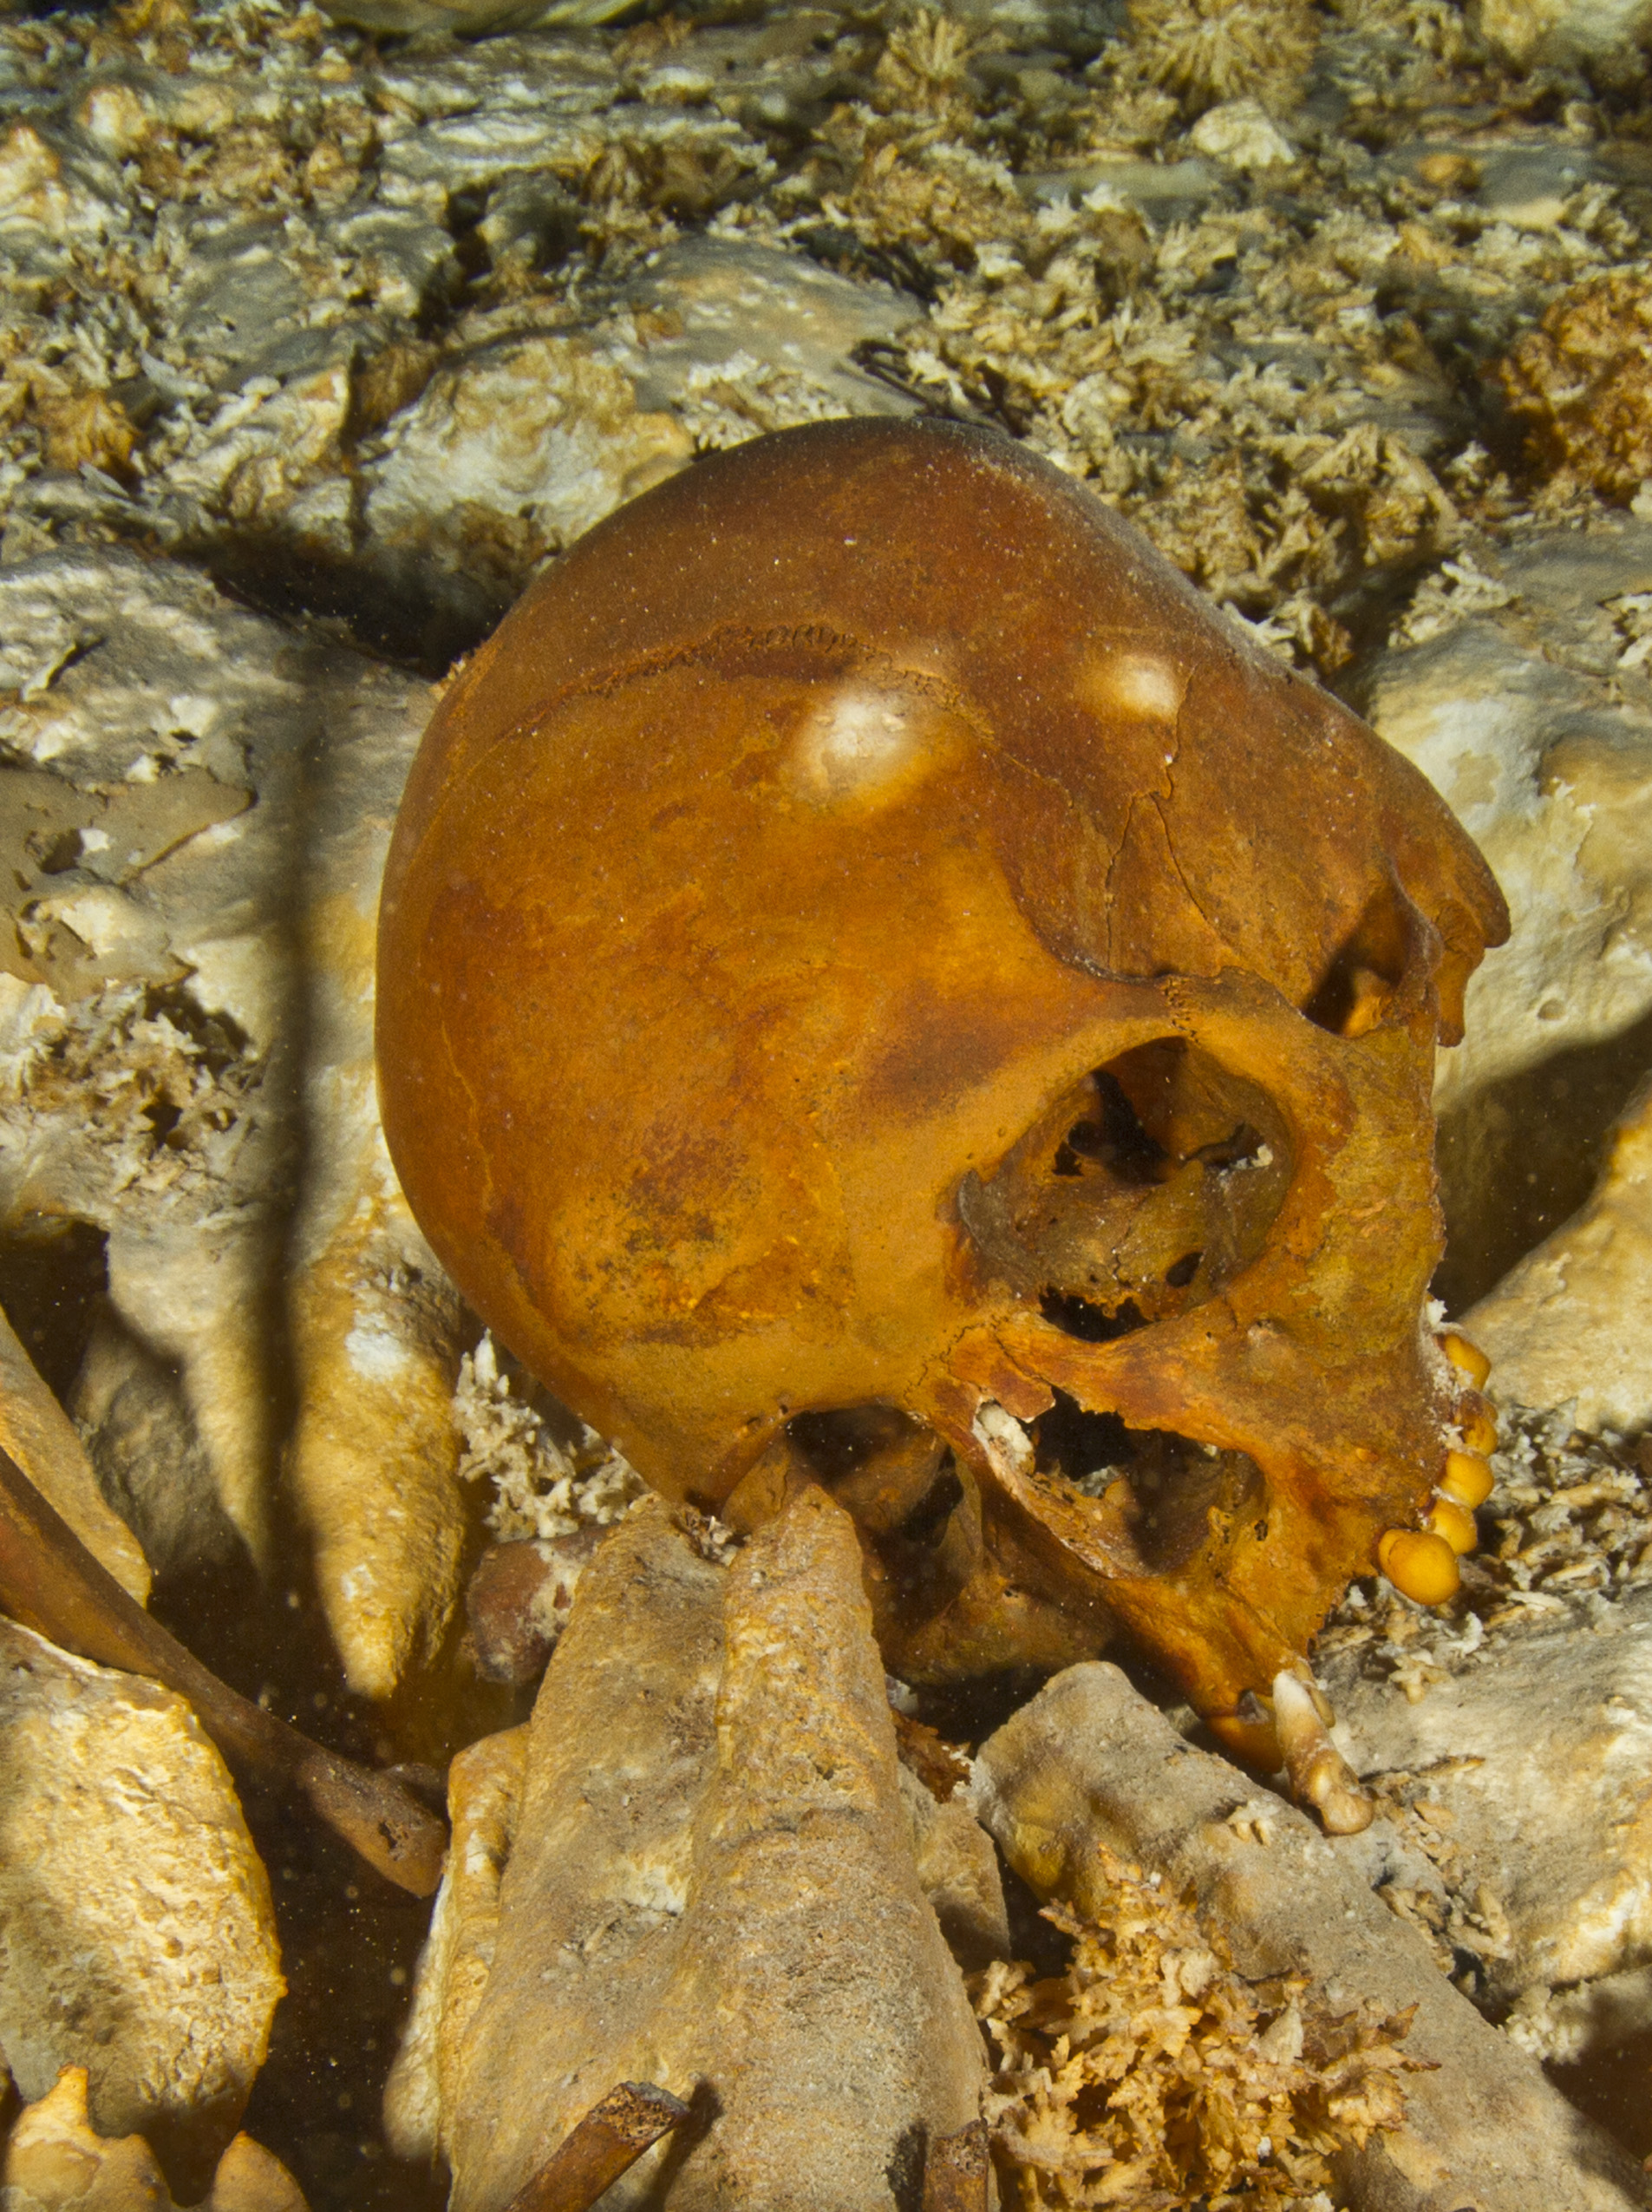 The skull of Naia, as it appeared in 2011, having rolled into an upright position